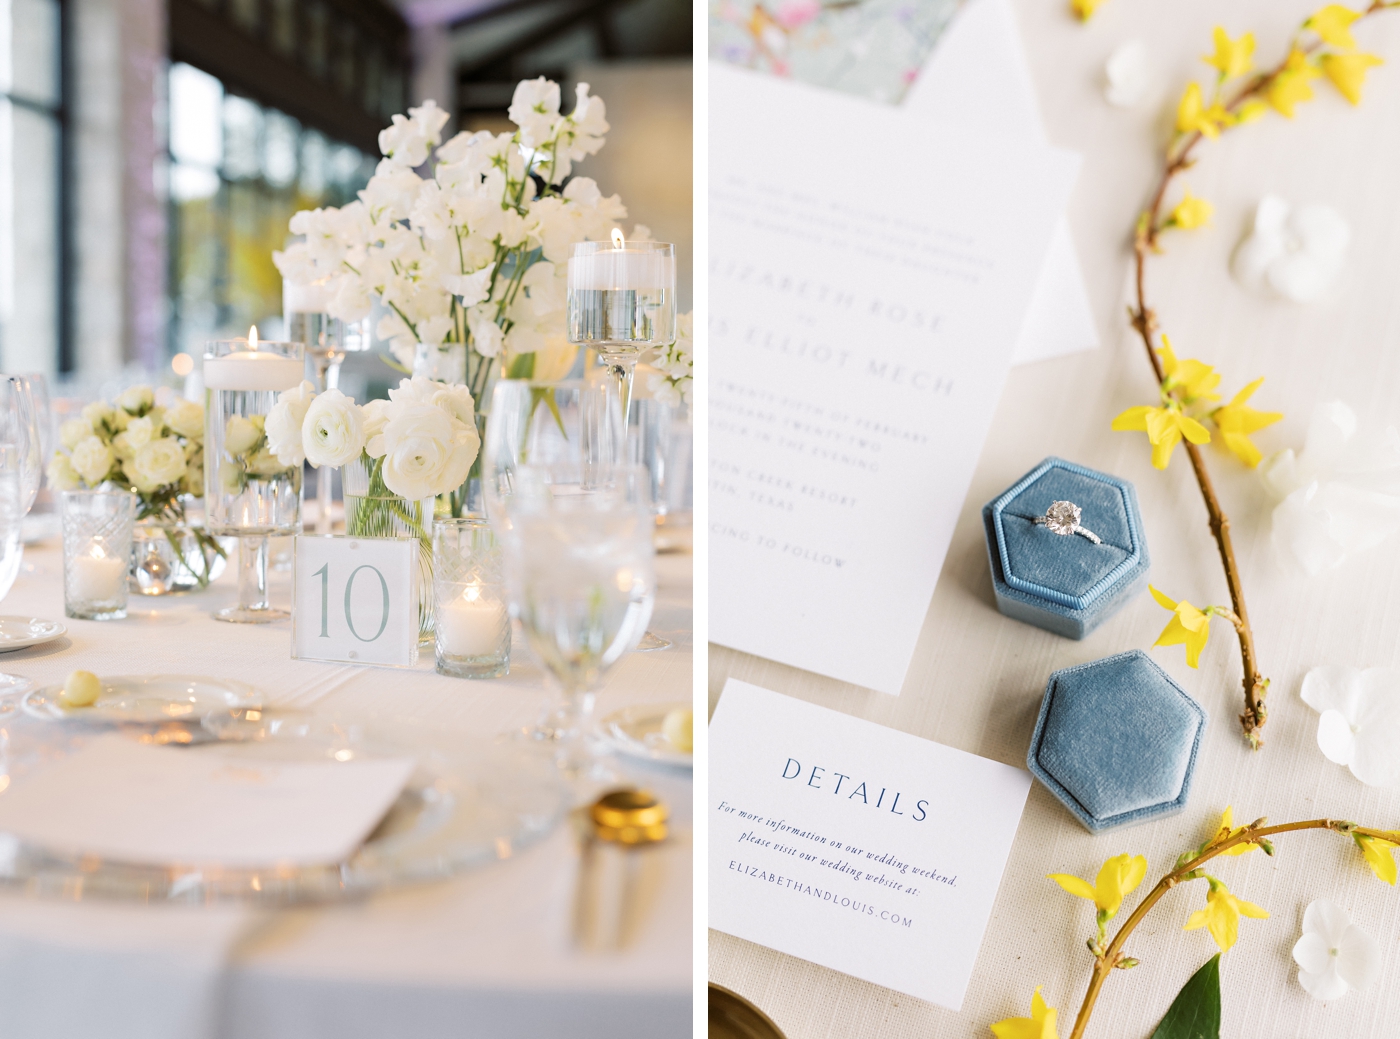 Monogram and Chinoiserie print details for a winter wedding in Austin